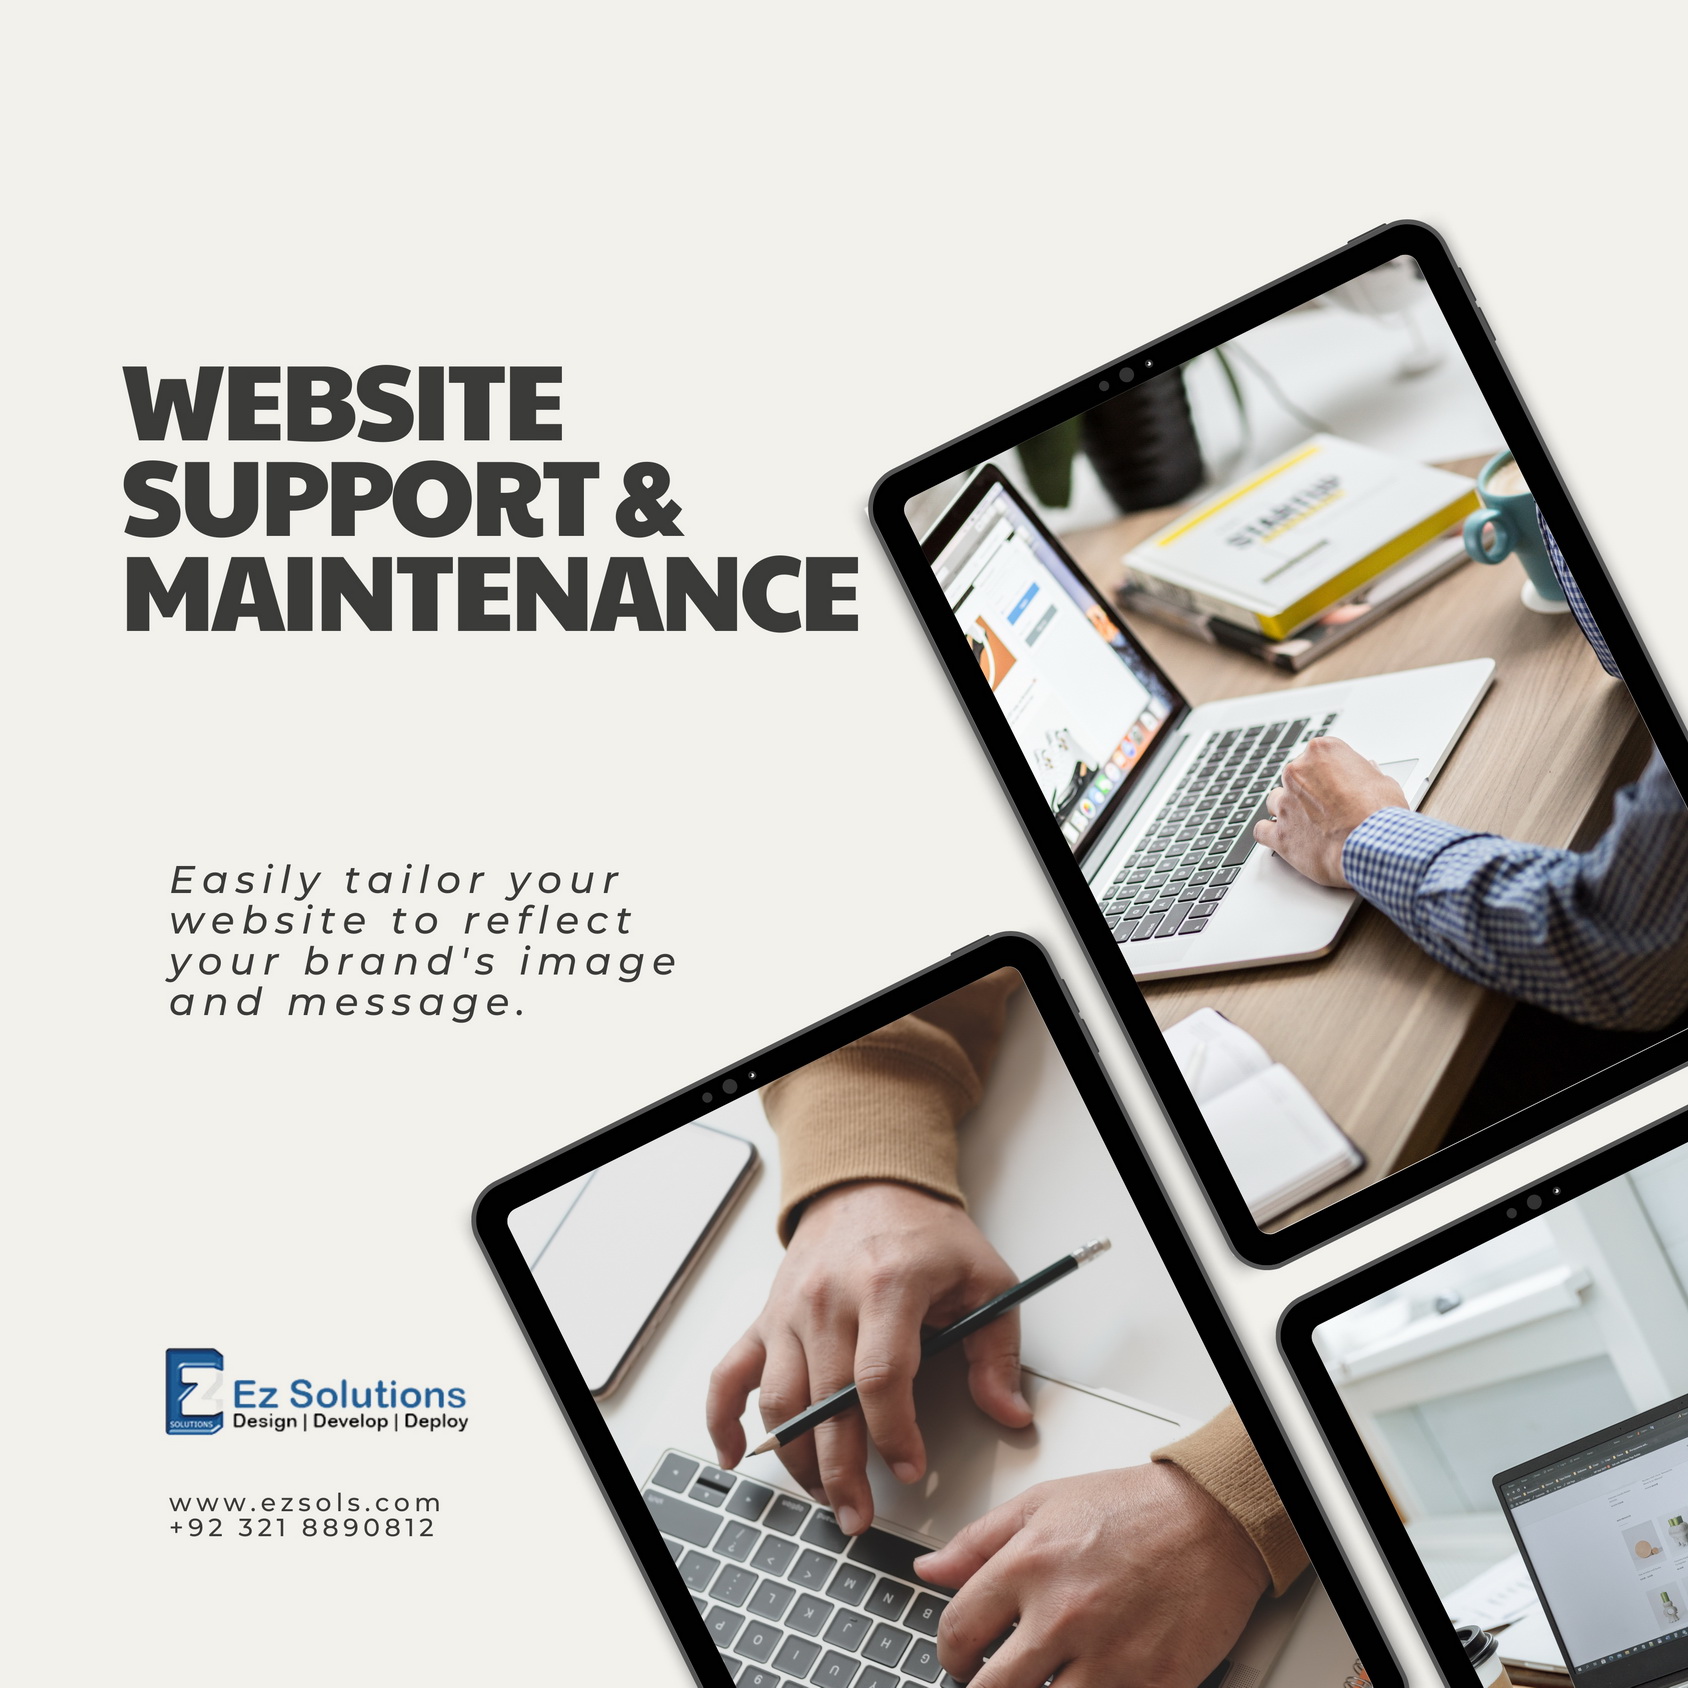 Website support & maintenance by Ez Solutions_resize